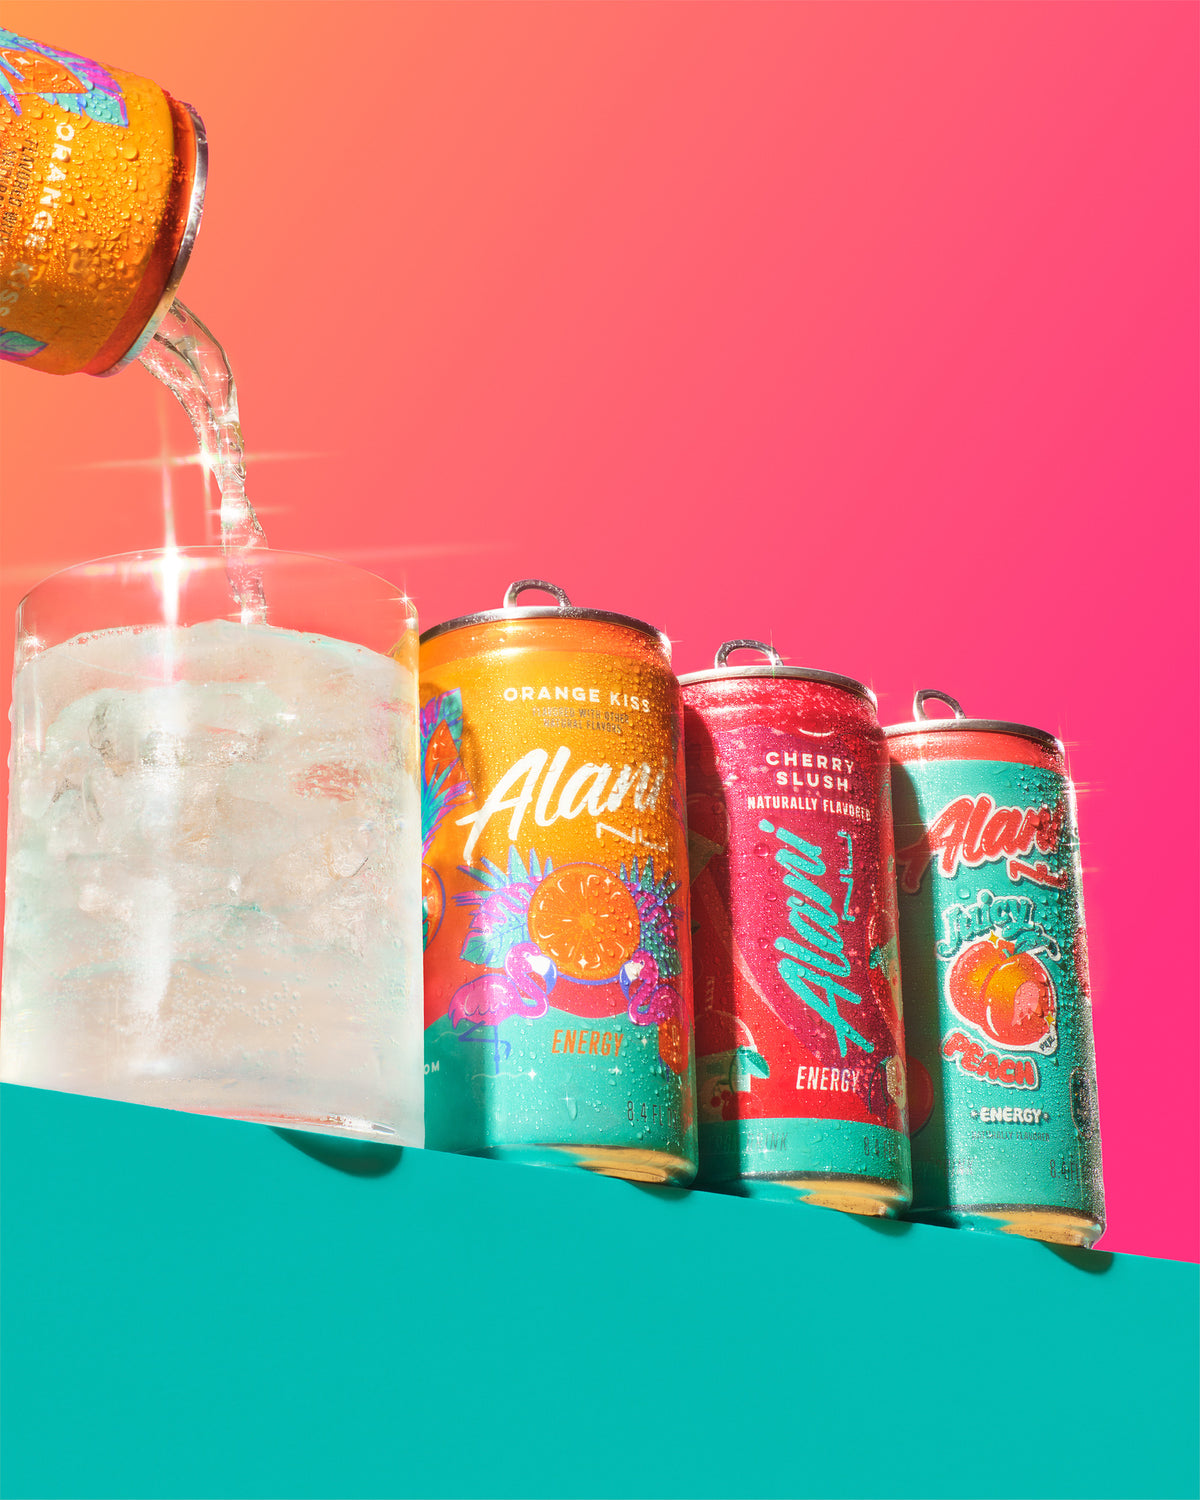 A mini can of Orange Kiss flavor is being poured into a clear glass with ice, showcasing the effervescent beverage. The visible flavors include Orange Kiss, Cherry Slush, and Juicy Peach, all featuring lively and colorful designs that resonate with a fun and youthful vibe.